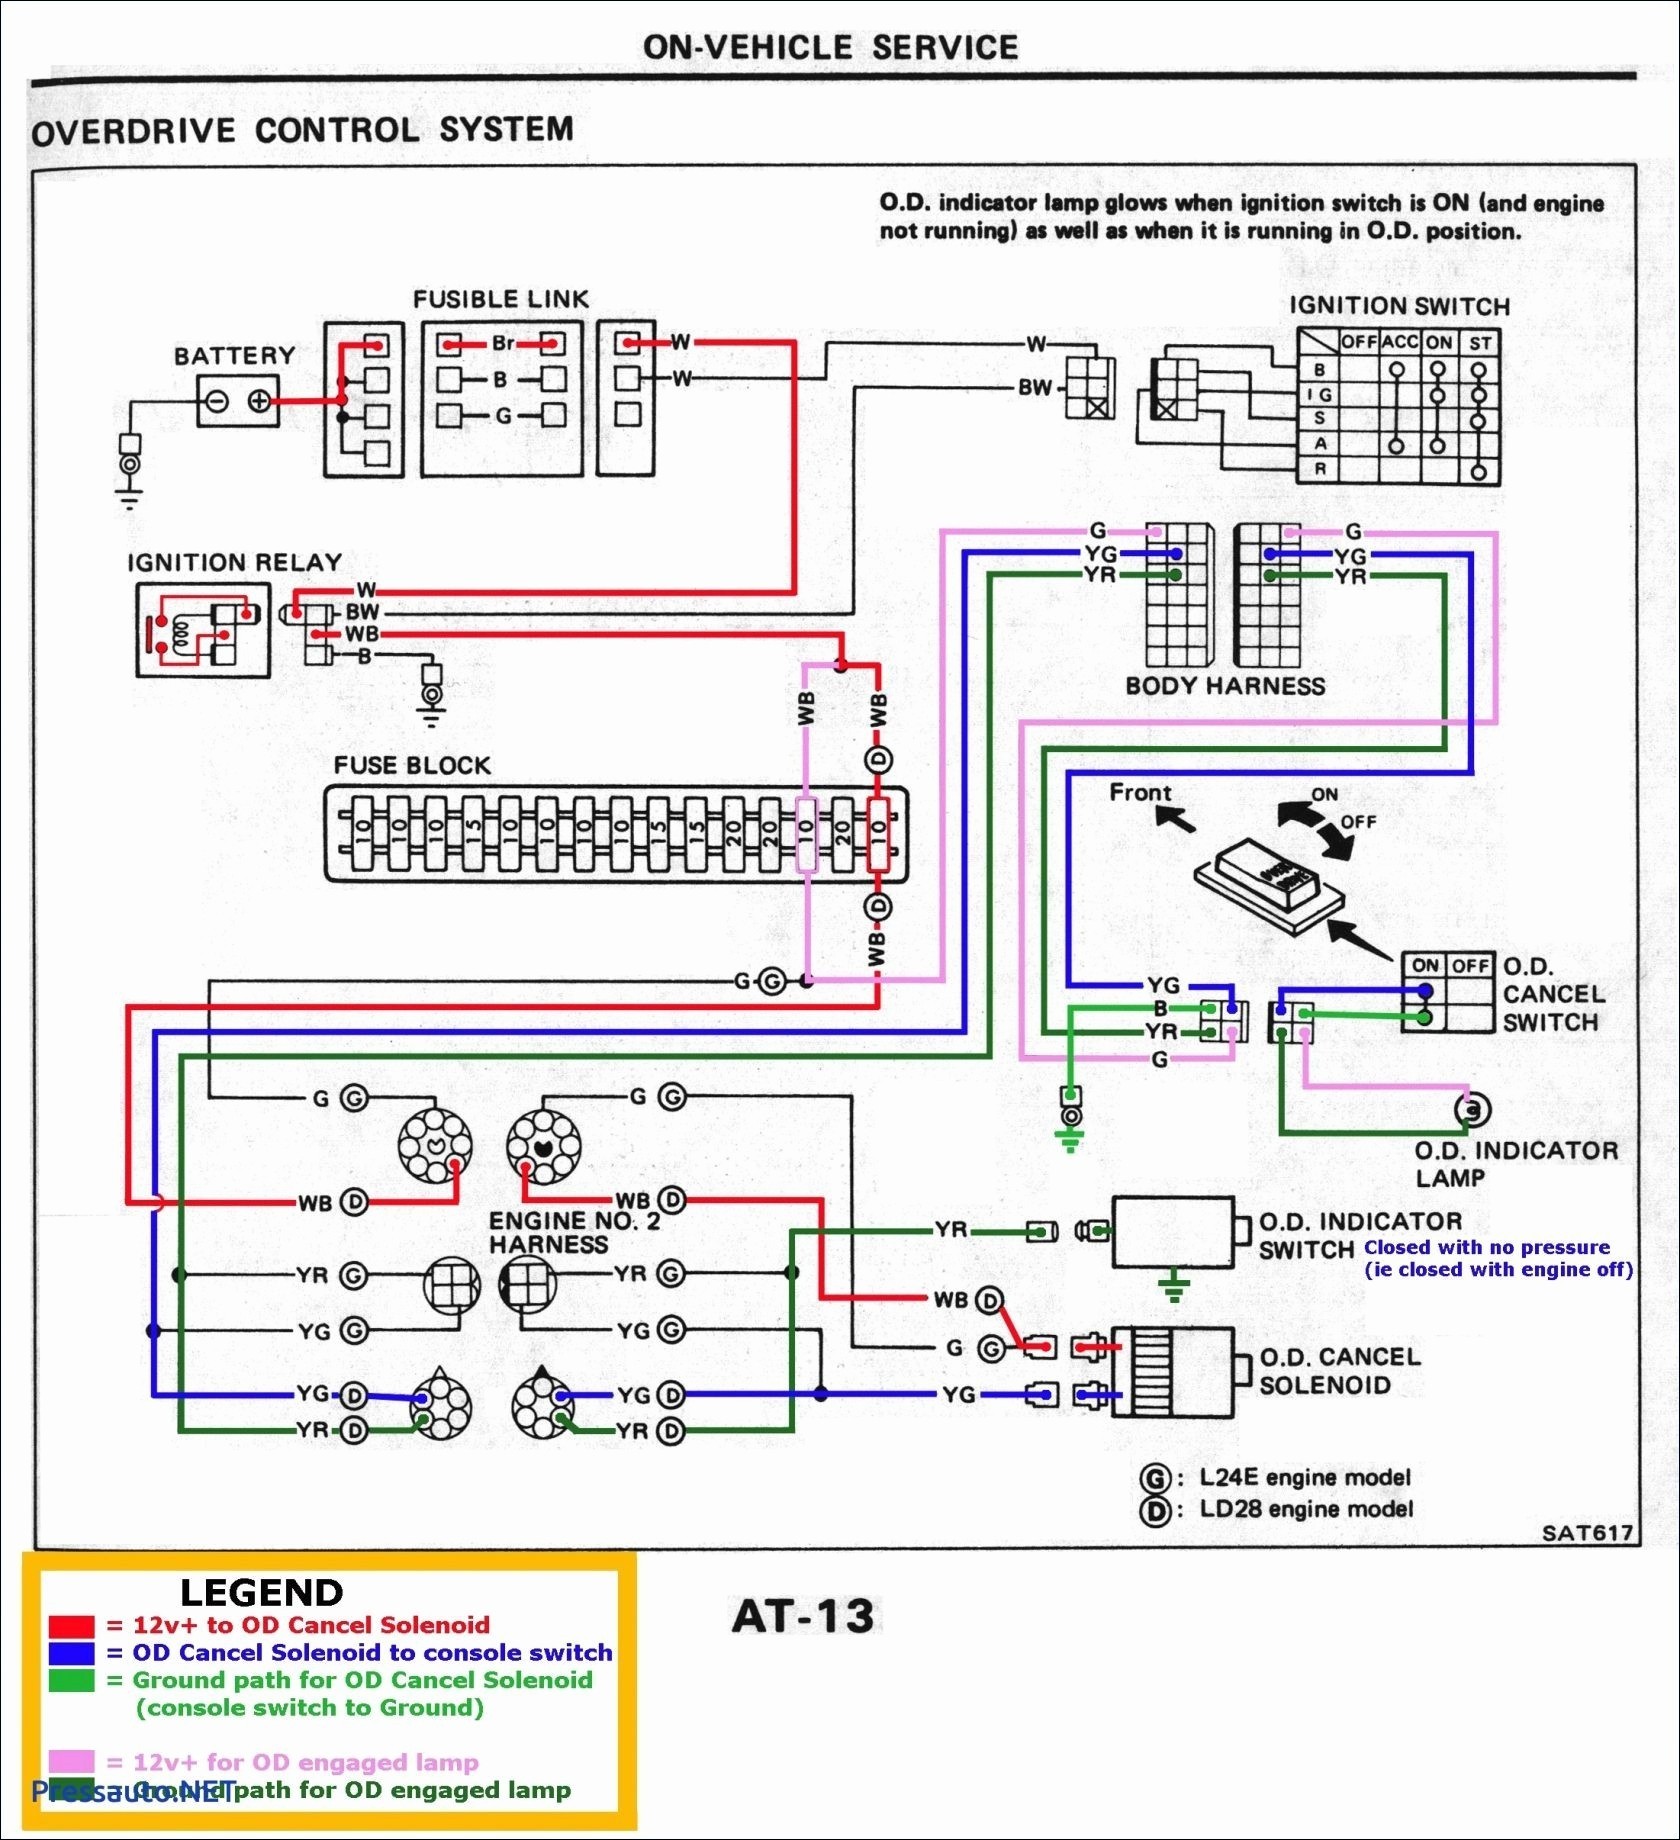 Cat5 Wall Plate Wiring Diagram Hdmi to Rj45 Wiring Diagram Of Cat5 Wall Plate Wiring Diagram